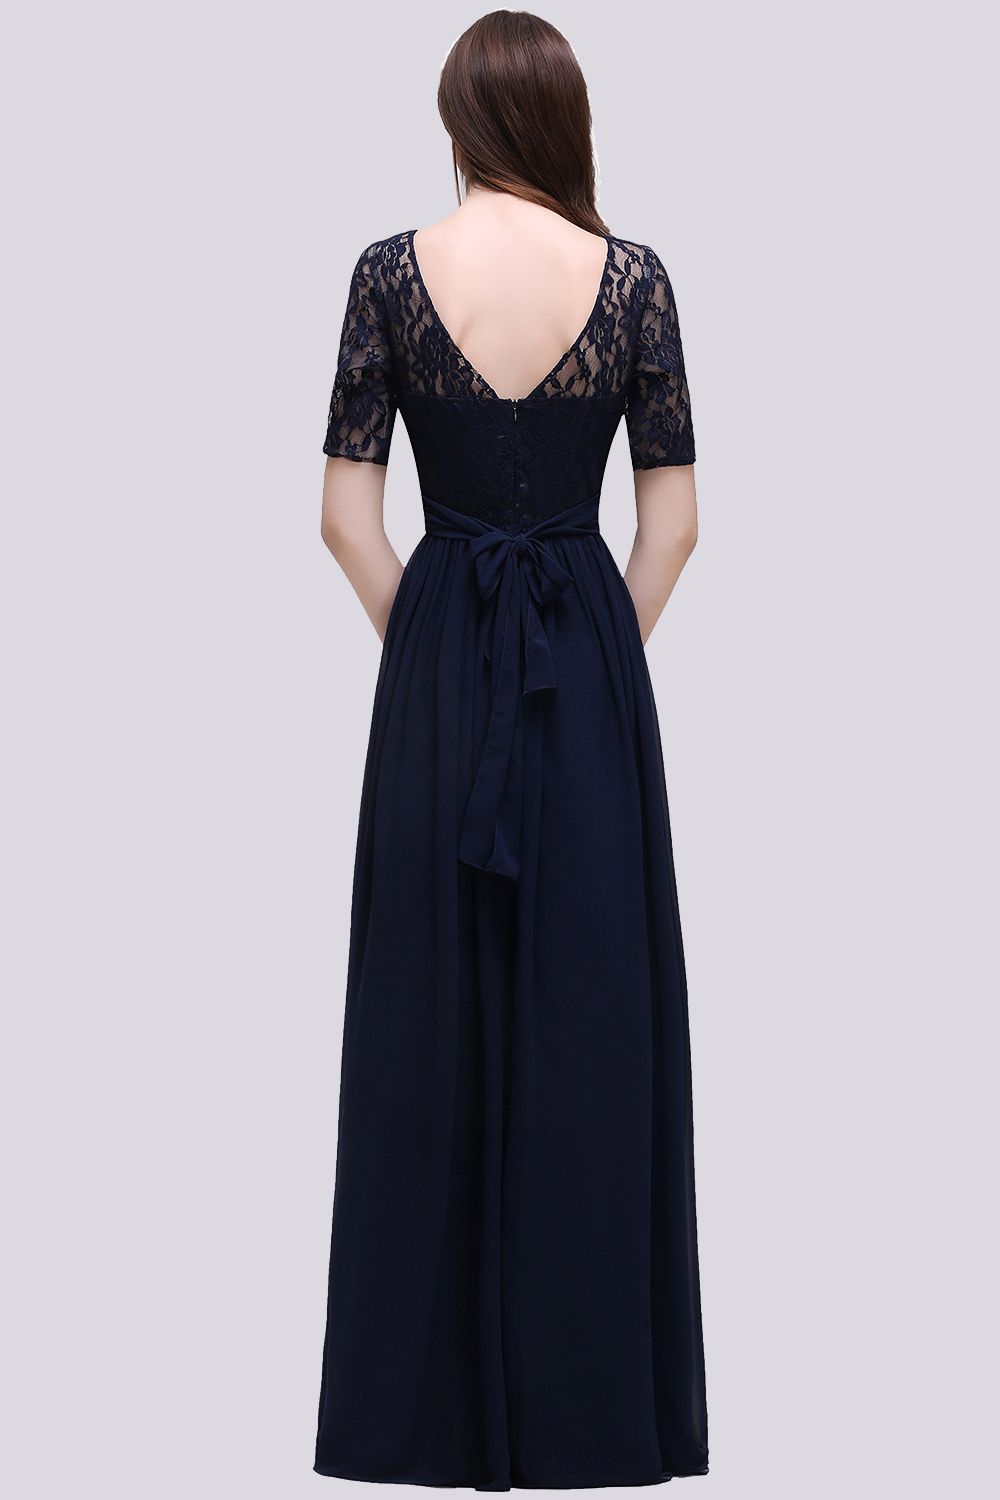 Affordable Lace Scoop Dark Navy Bridesmaid Dresses with Half-Sleeves